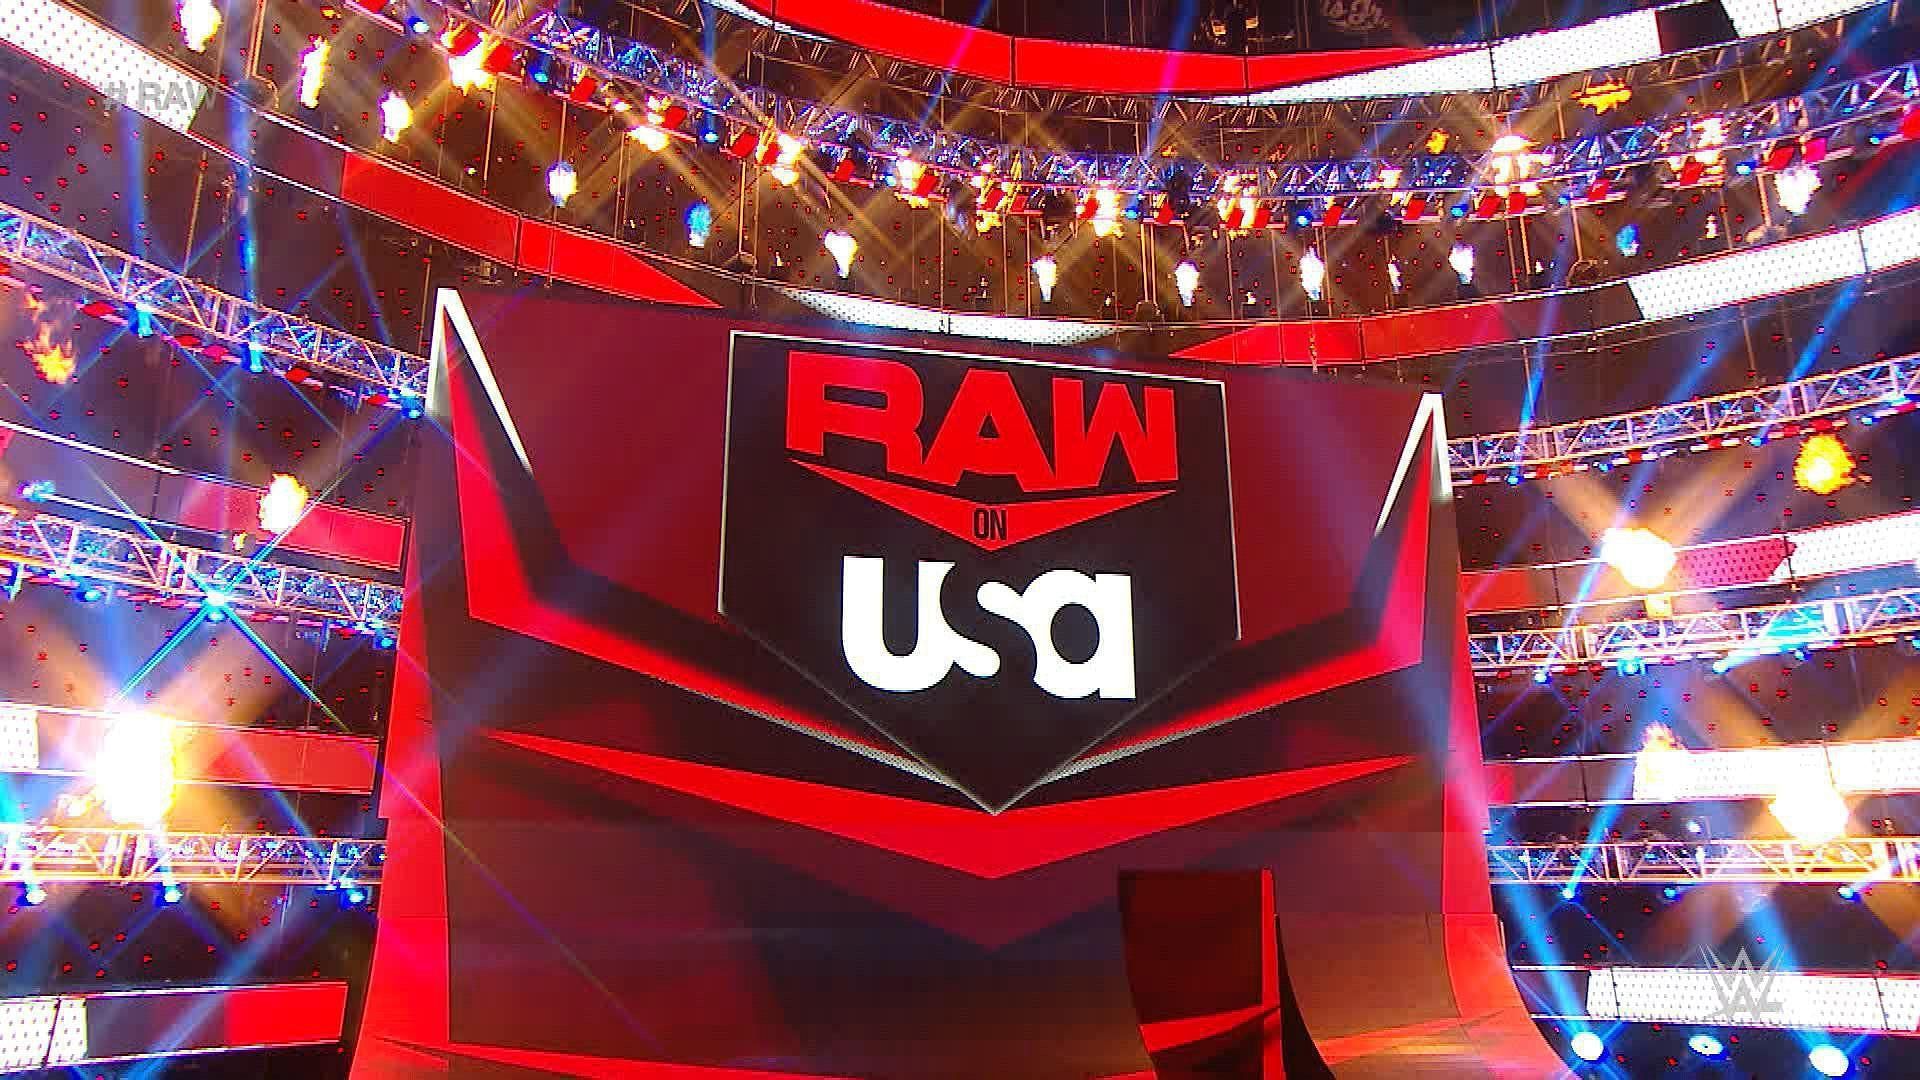 The official logos for WWE RAW and the USA Network